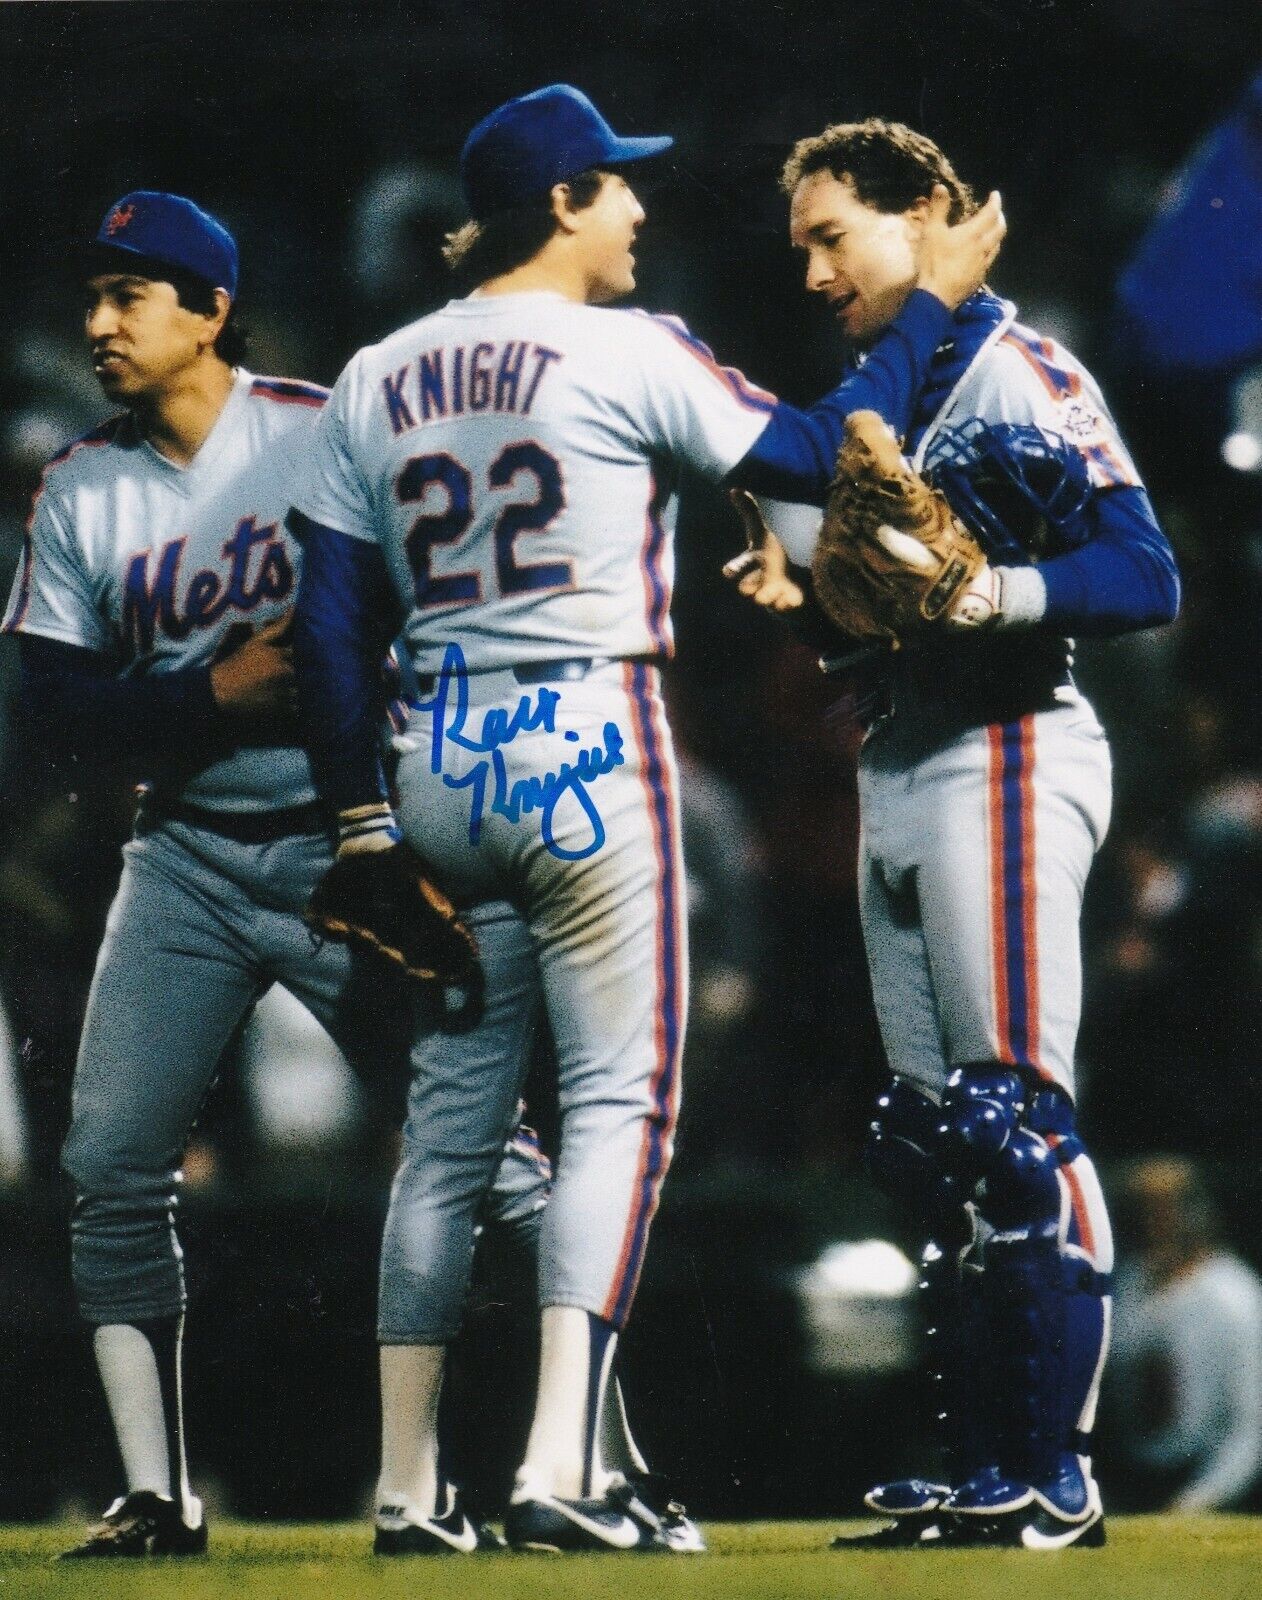 RAY KNIGHT NEW YORK METS W/ GARY CARTER ACTION SIGNED 8x10